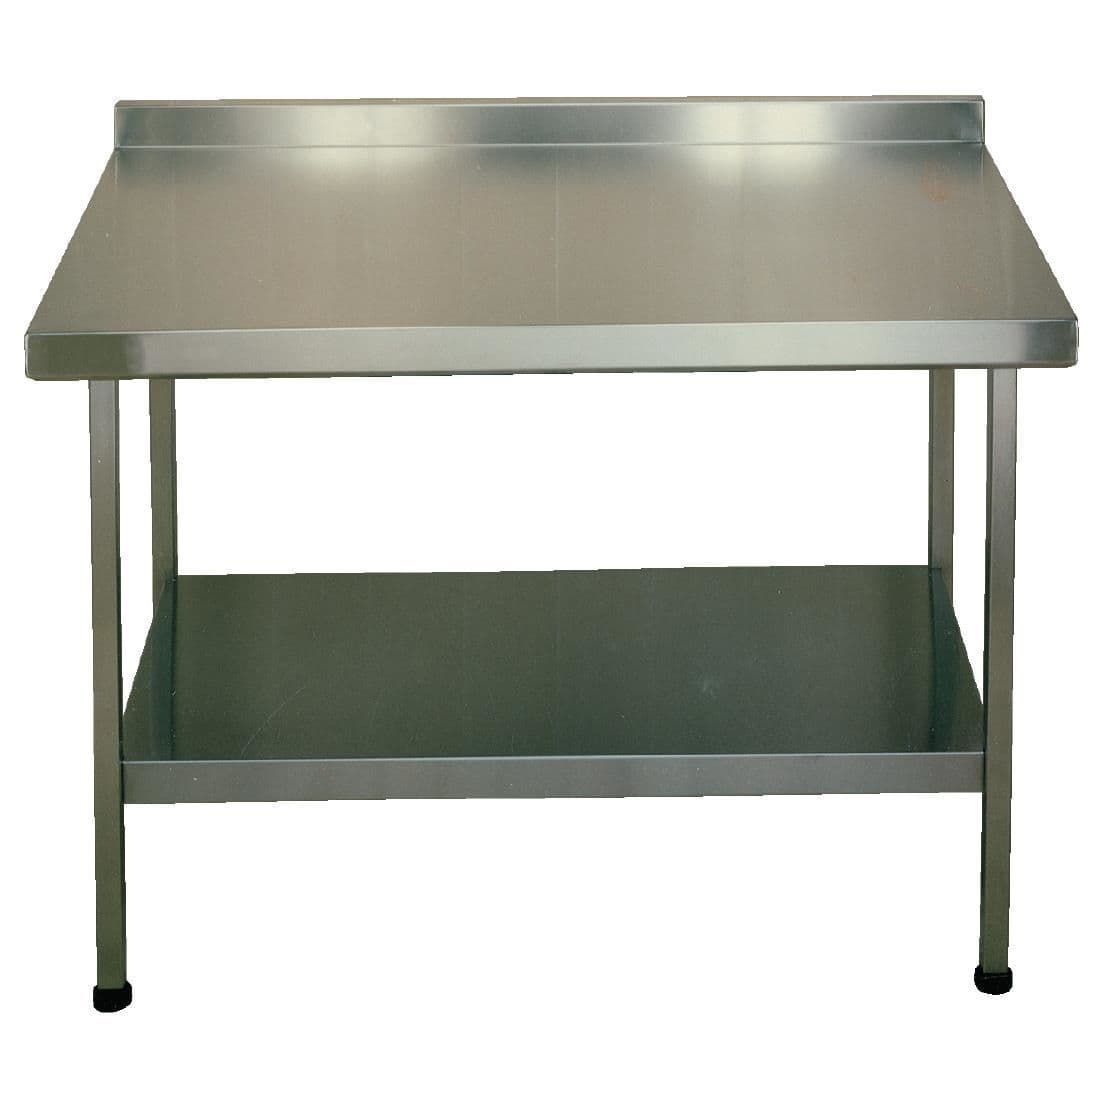 Franke Sissons Stainless Steel Wall Table with Upstand 1800x650mm JD Catering Equipment Solutions Ltd